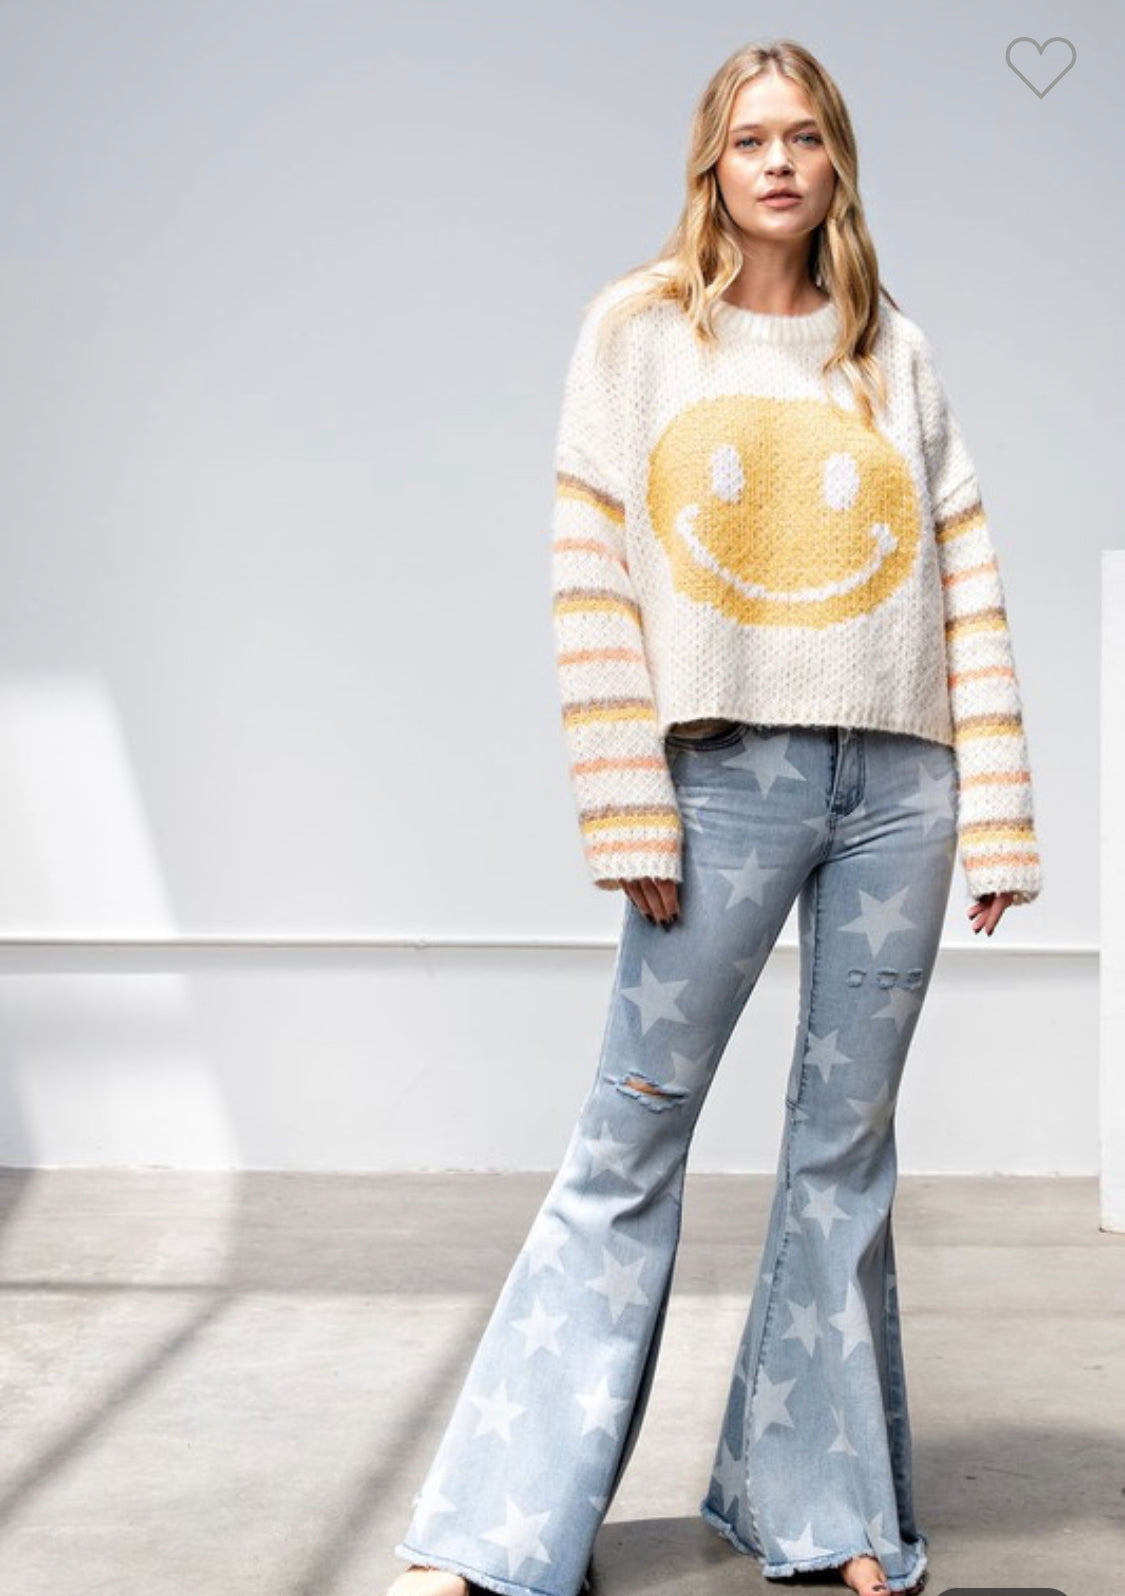 BLISS SMILEY FACE KNIT SWEATER